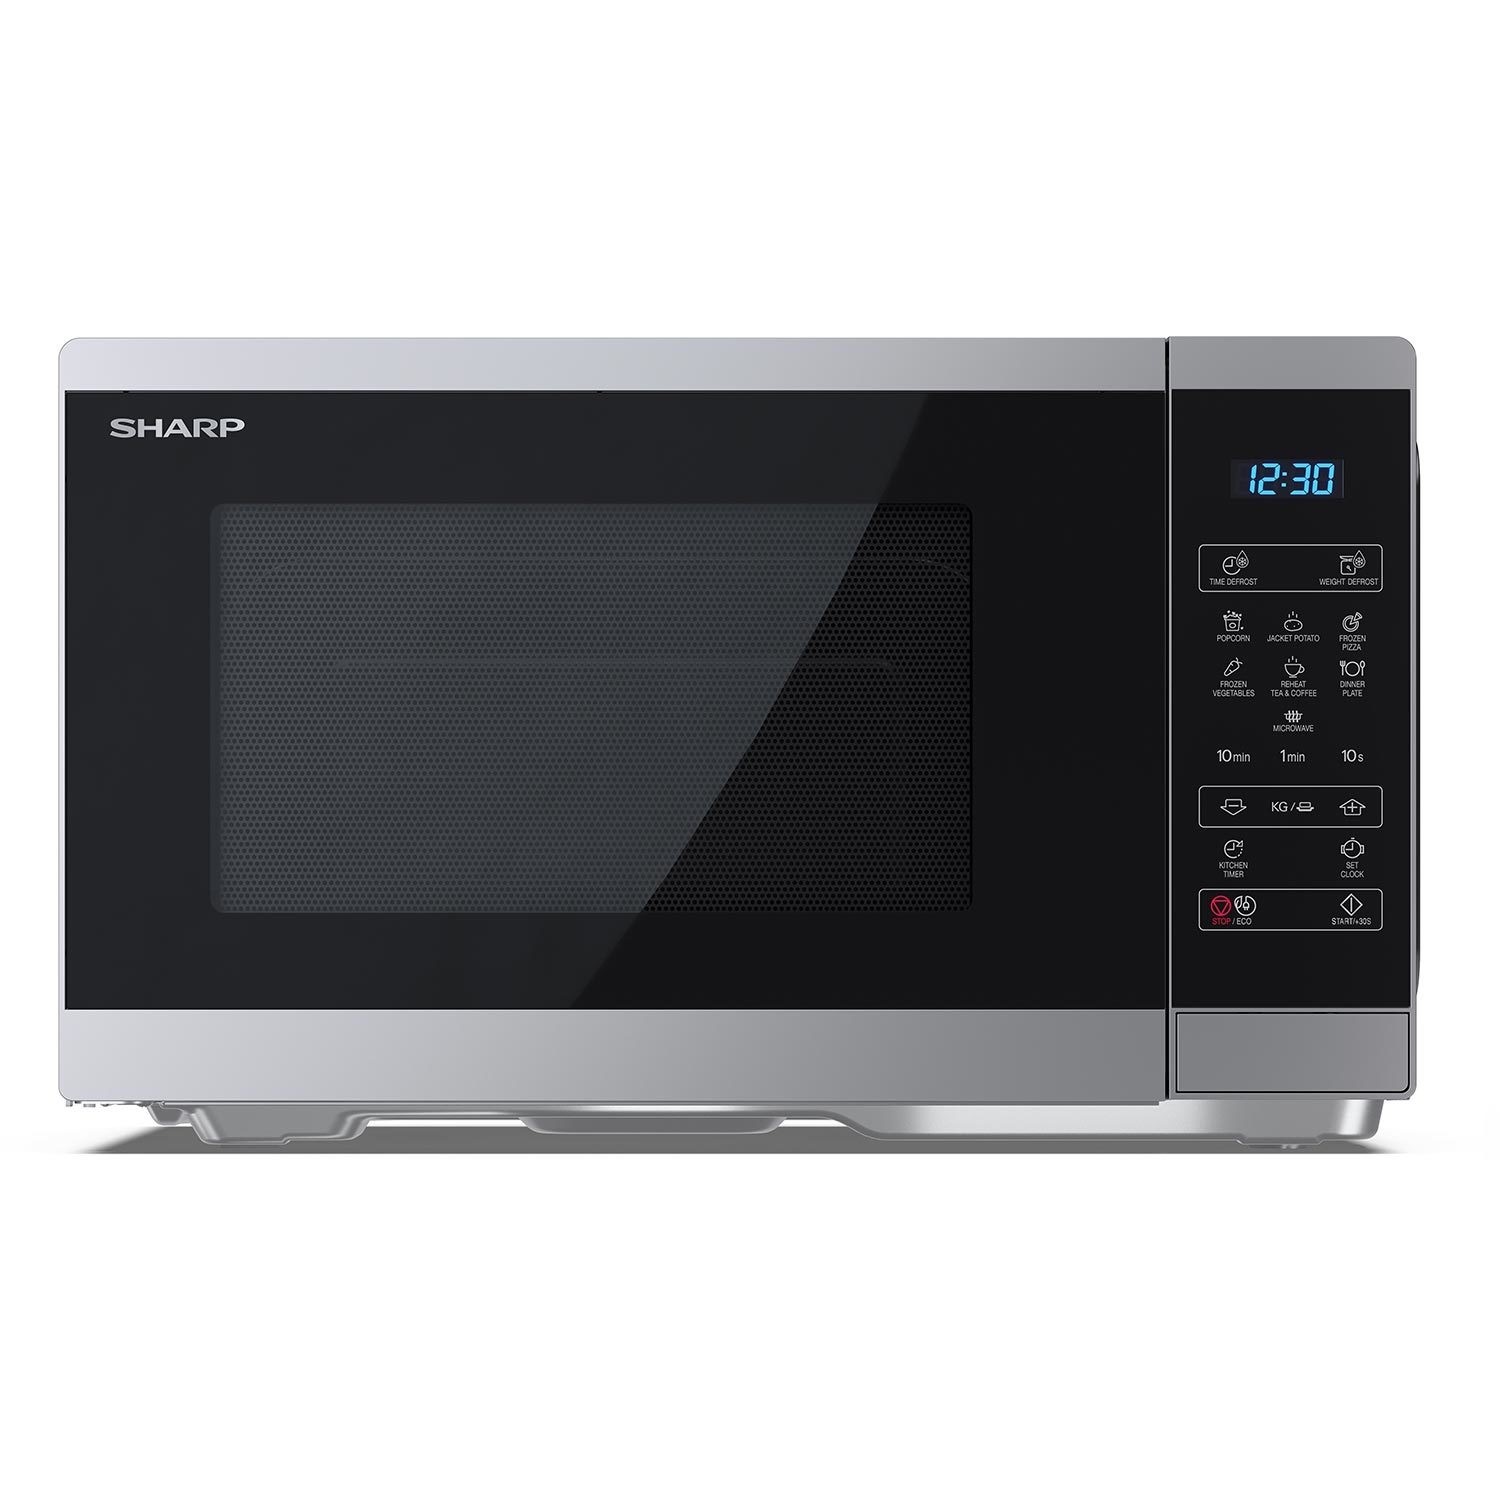 Photos - Other for Computer Sharp YCMS252AUS 25L 900W Digital Solo Microwave - Silver YC-MS252AU-S 